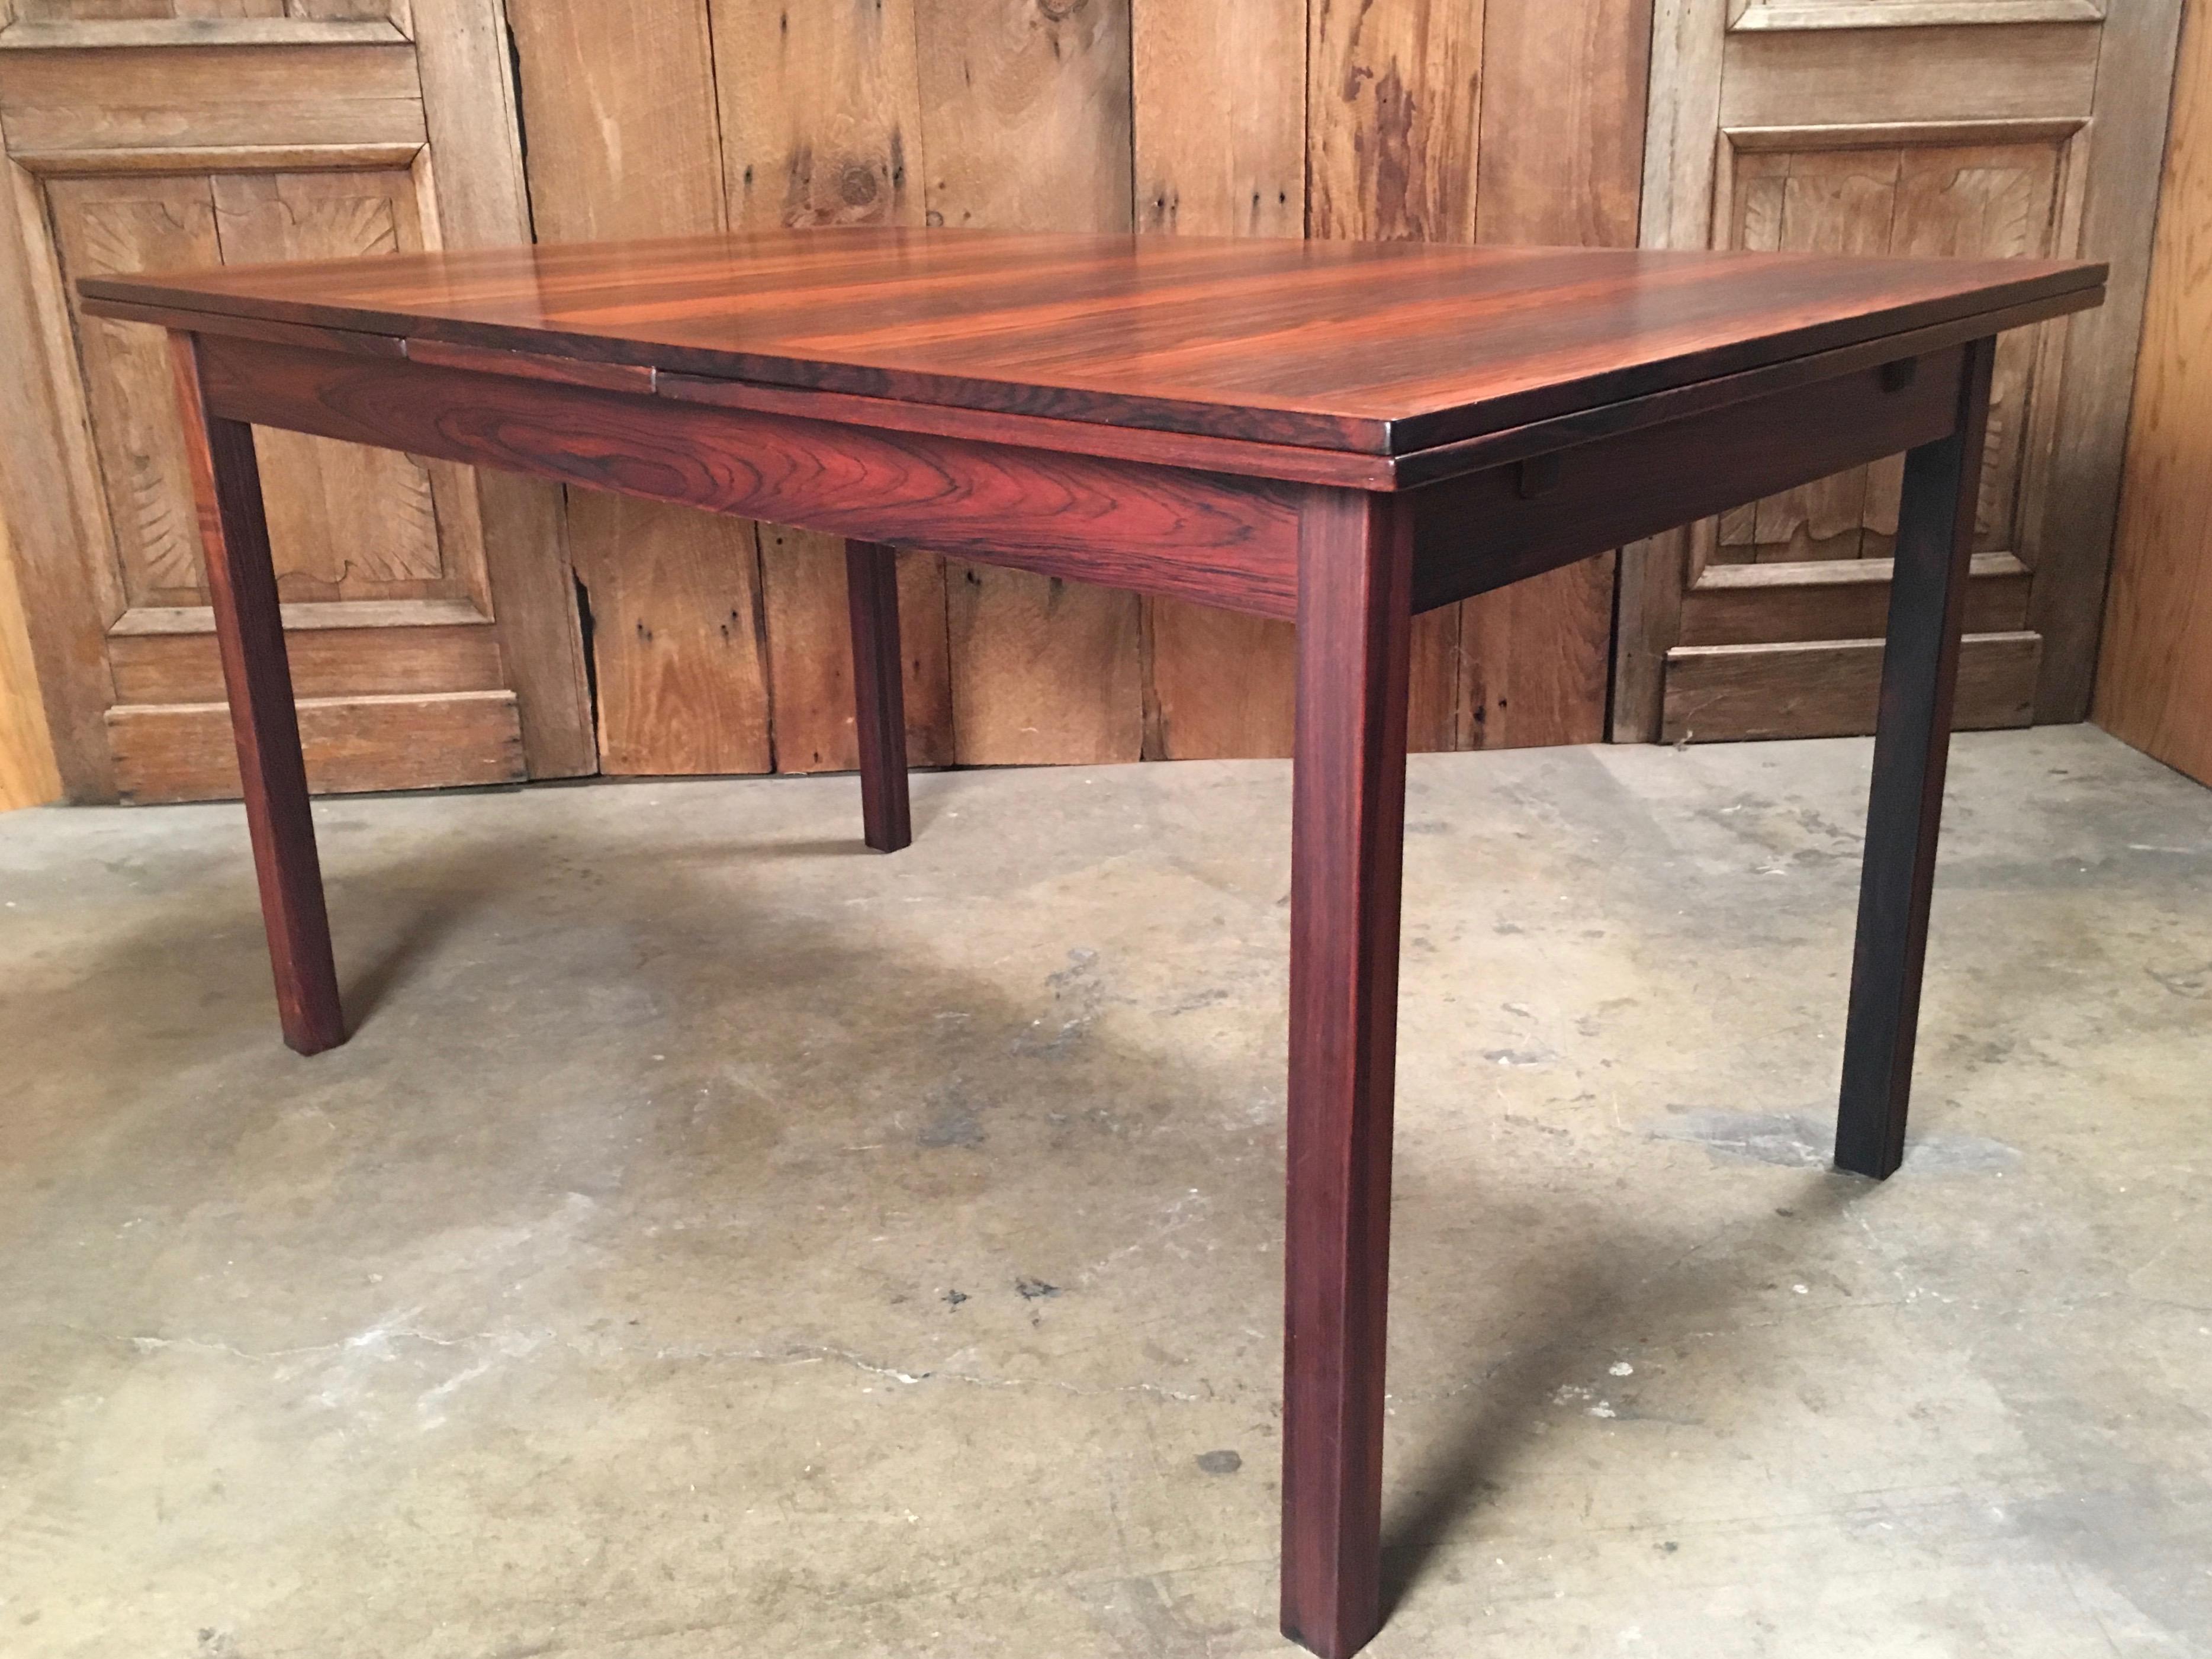 Rosewood draw-leaf table 
The table is 55